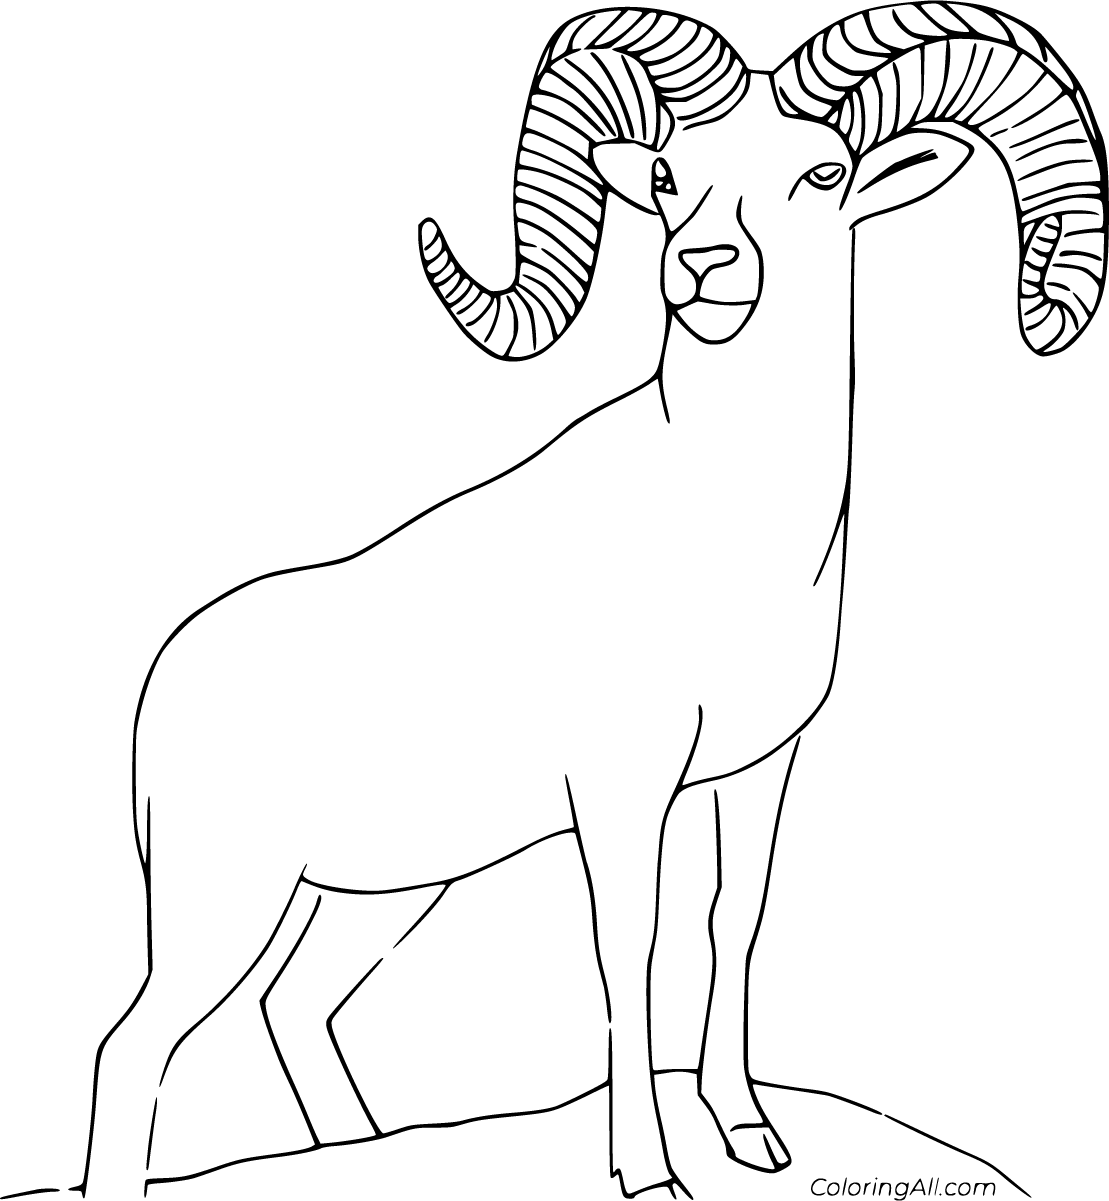 Bighorn Sheep Coloring Pages ColoringAll